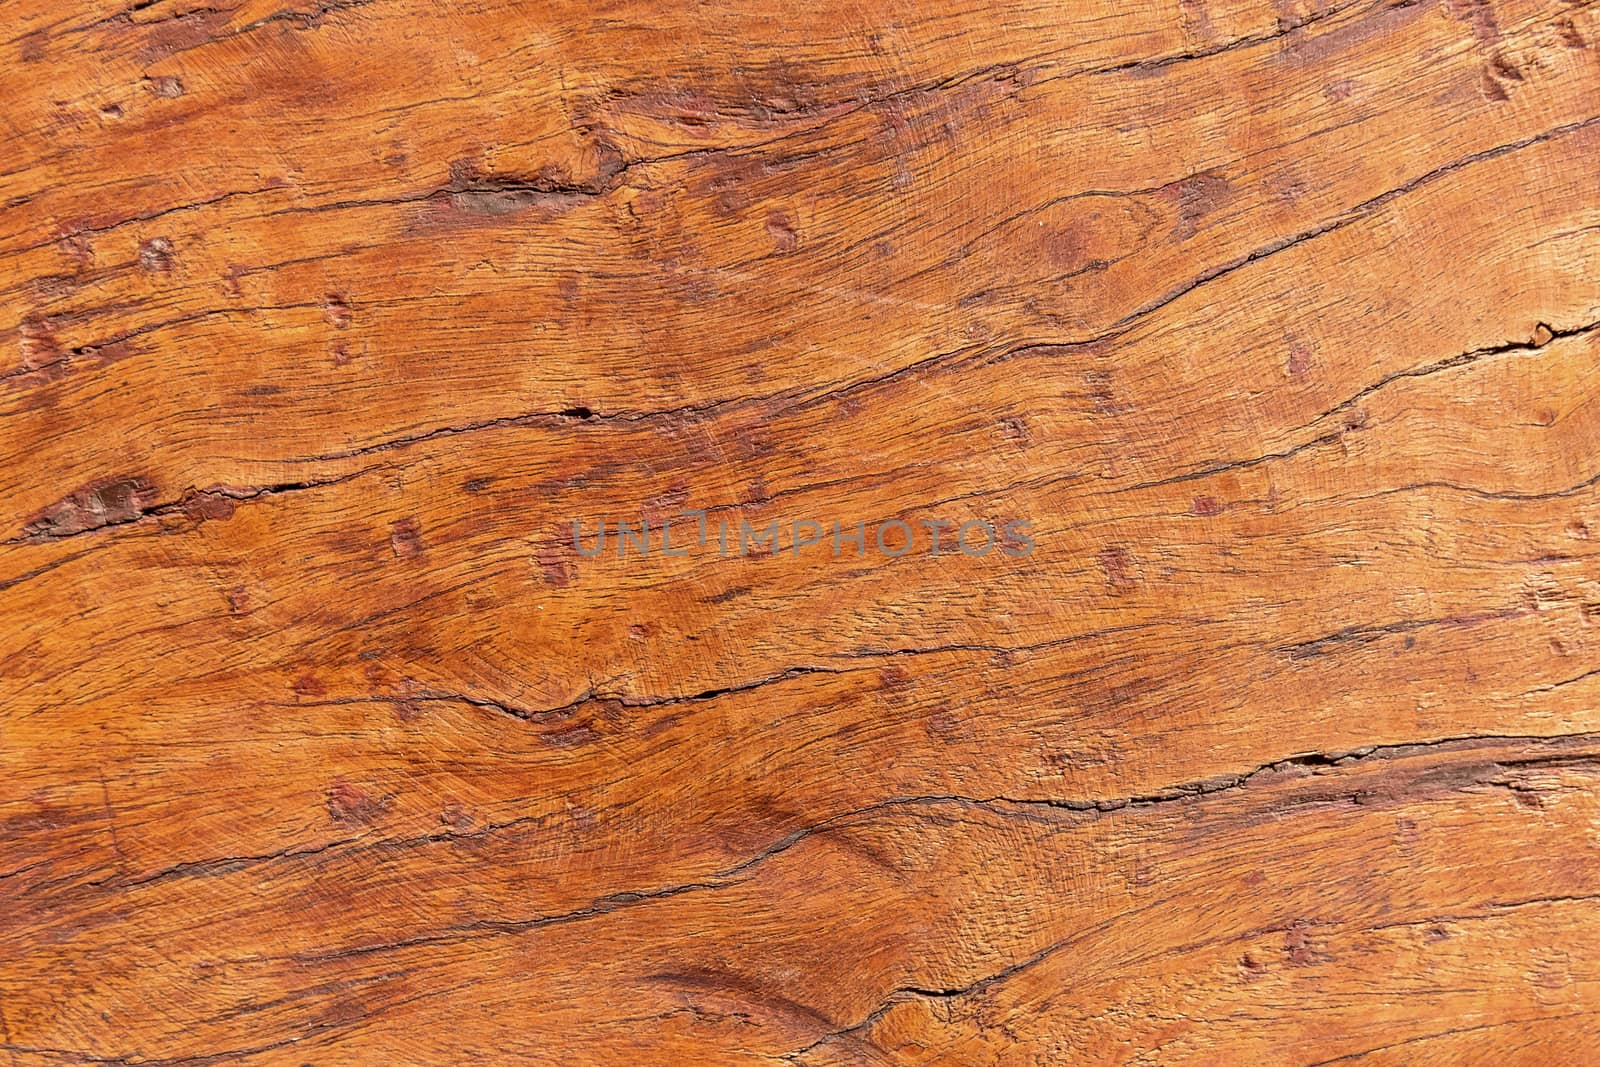 Brown wood texture background. Material construction and architectural detail.